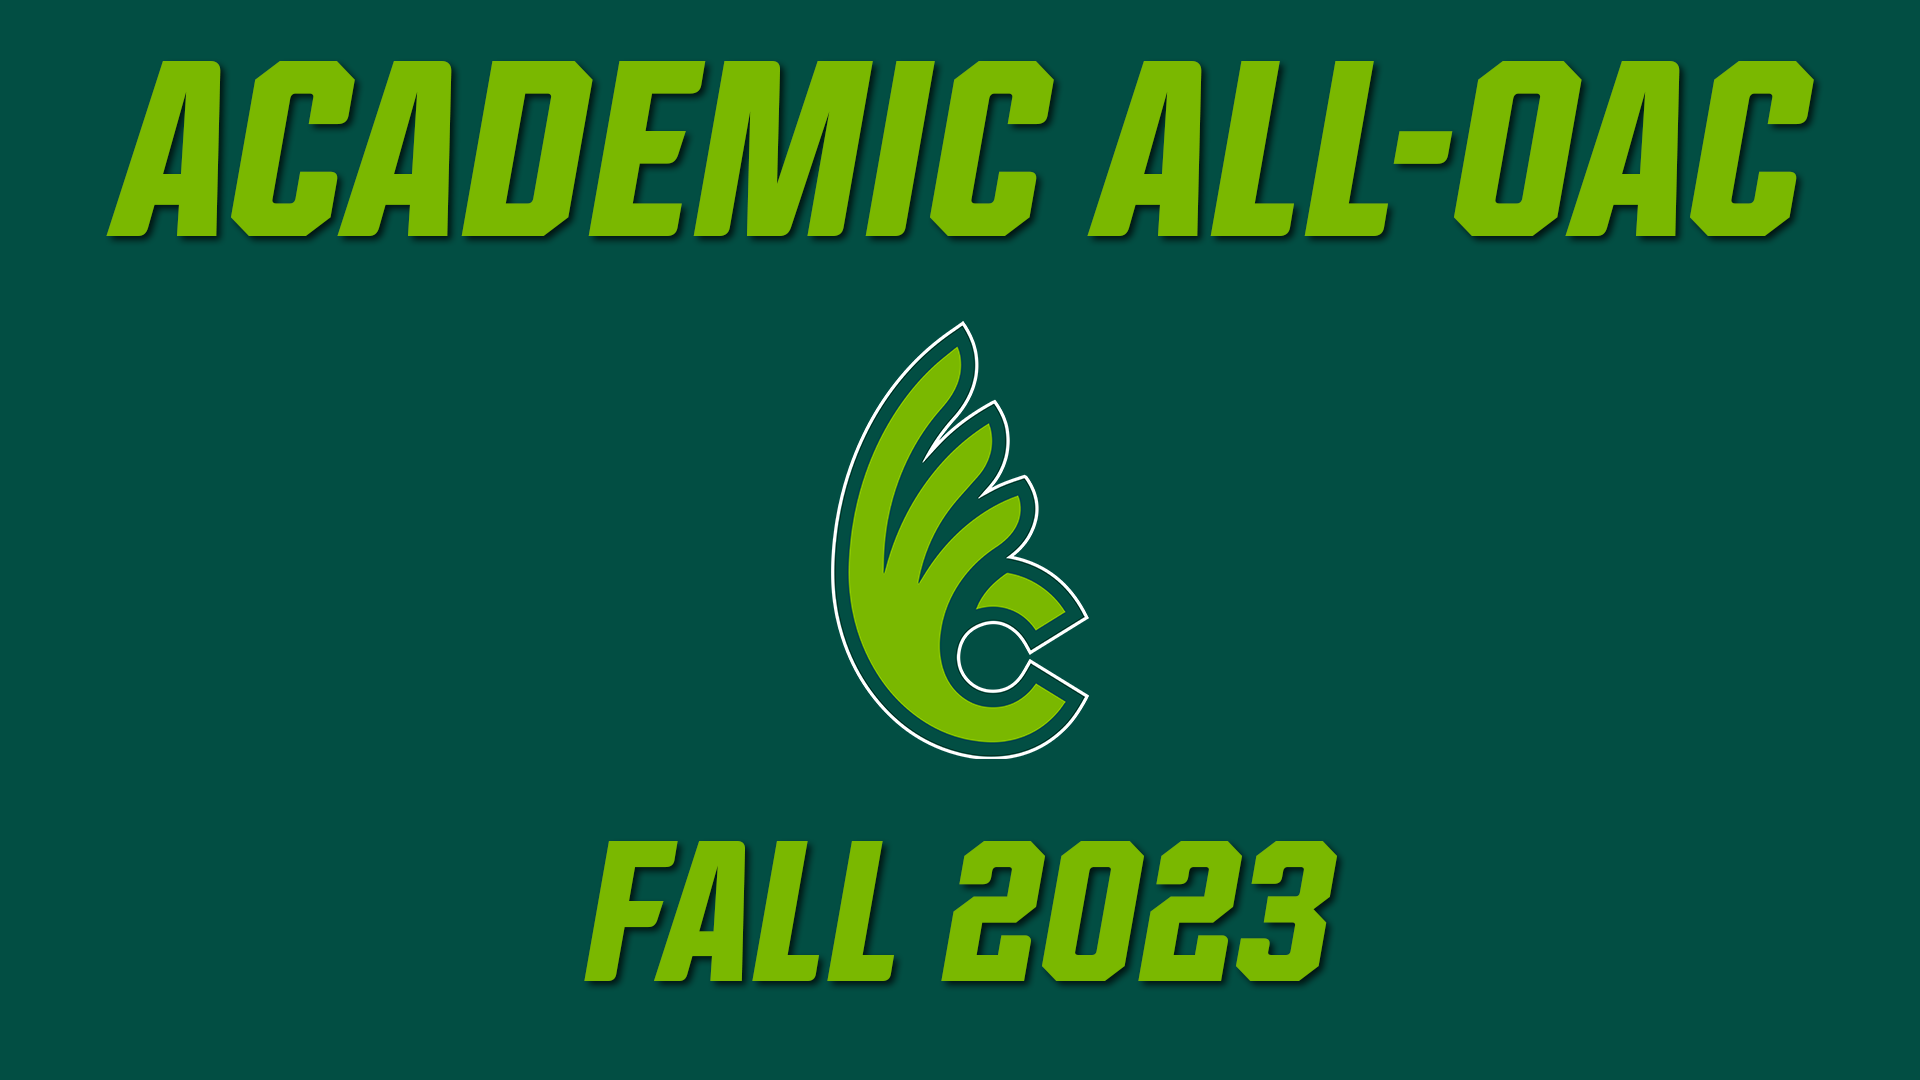 35 Student Athletes Named to Fall Academic All-OAC Team